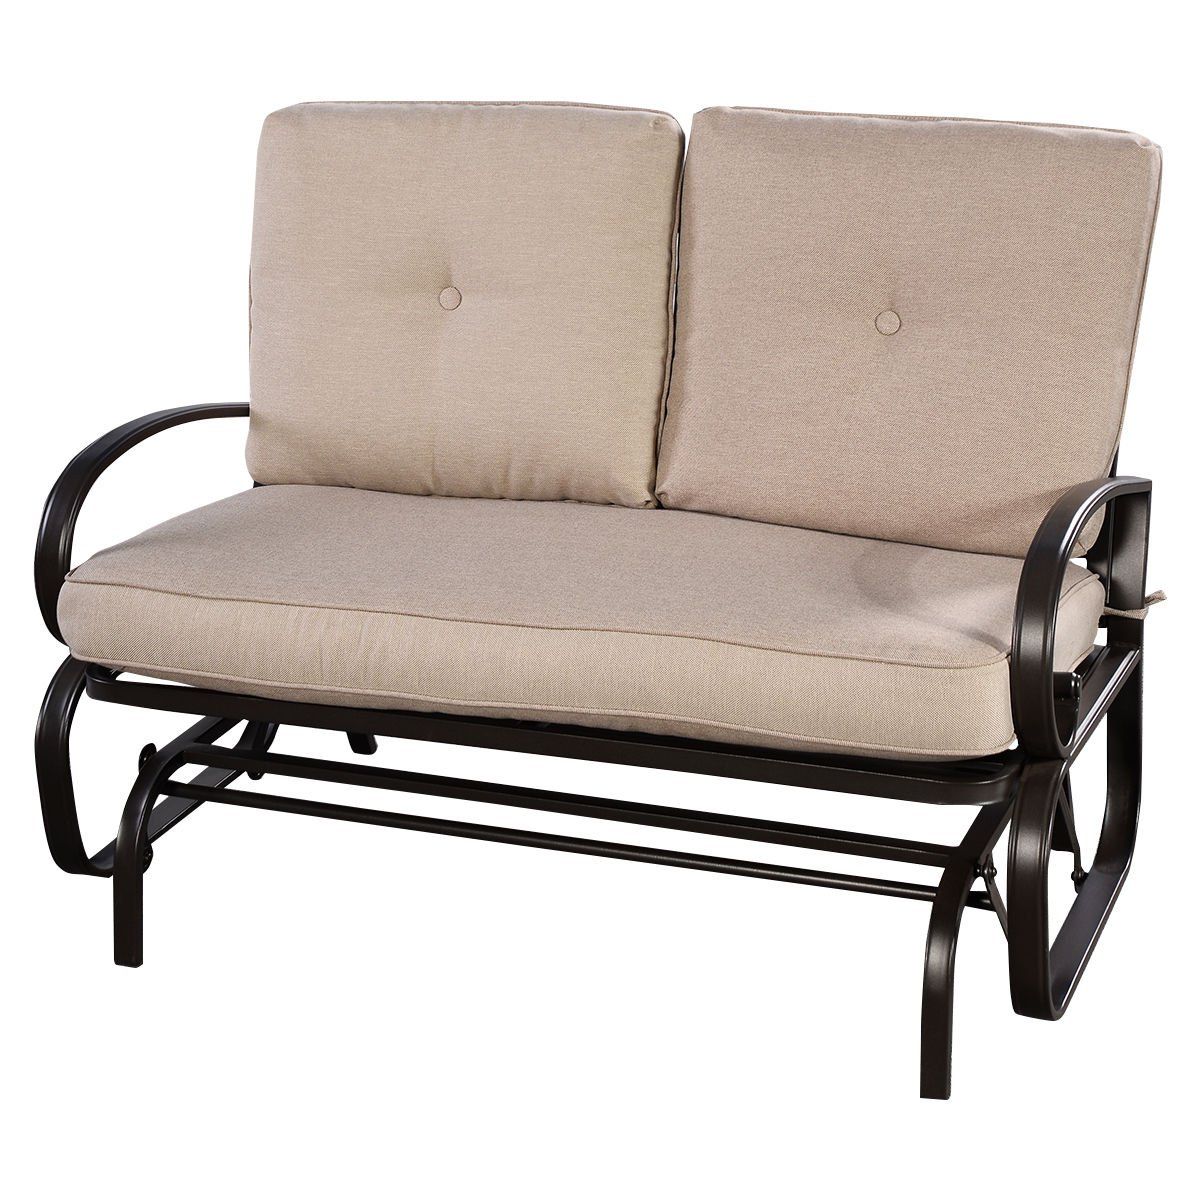 Most Popular Outdoor Loveseat Gliders With Cushion With Regard To Amazon : Fdinspiration  (View 13 of 30)